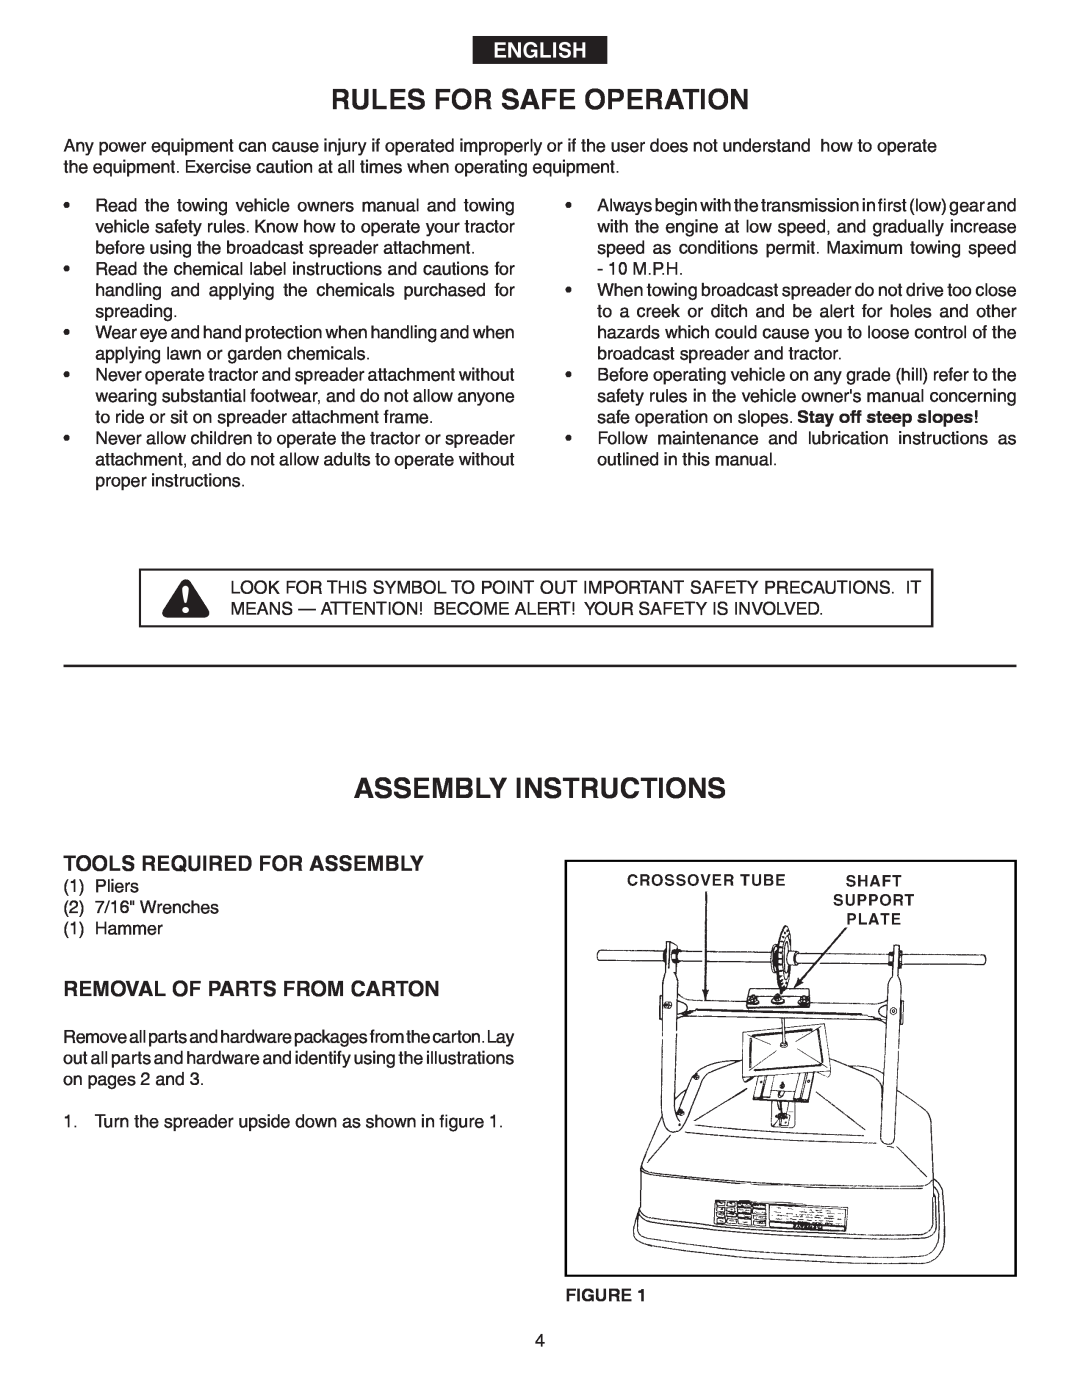 Agri-Fab 45-02114 owner manual Rules For Safe Operation, Assembly Instructions, Tools Required For Assembly, English 